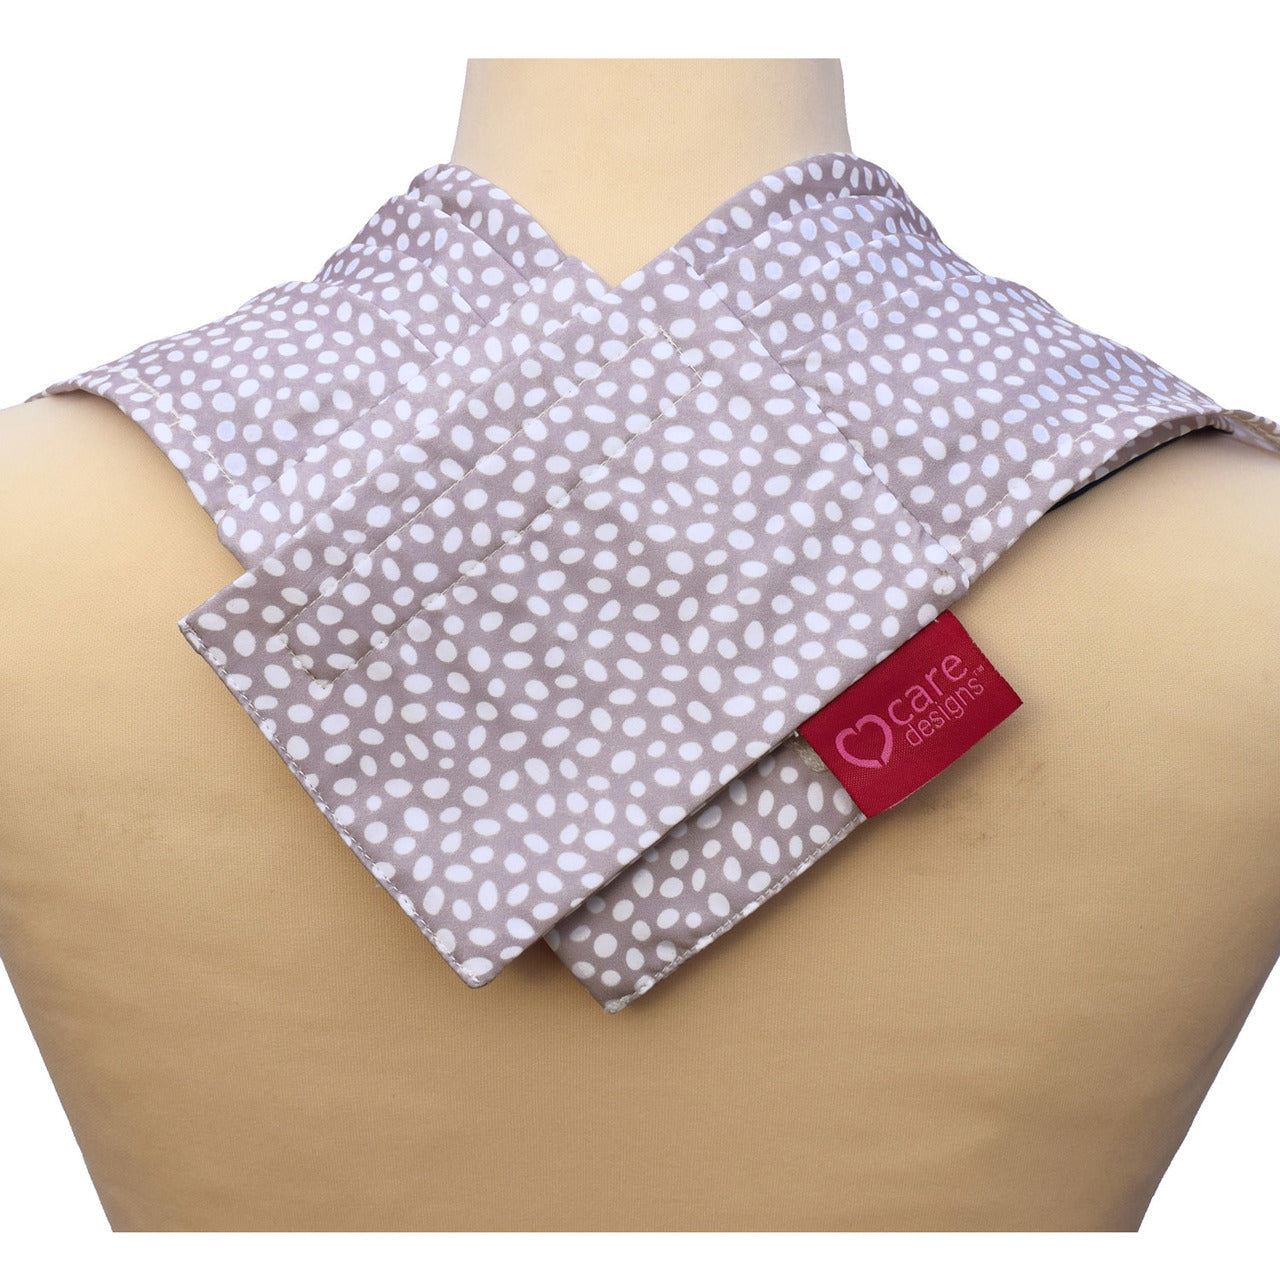 Pashmina scarf style clothing protector - Grey Dot (UK VAT Exempt) | Health Care | Care Designs